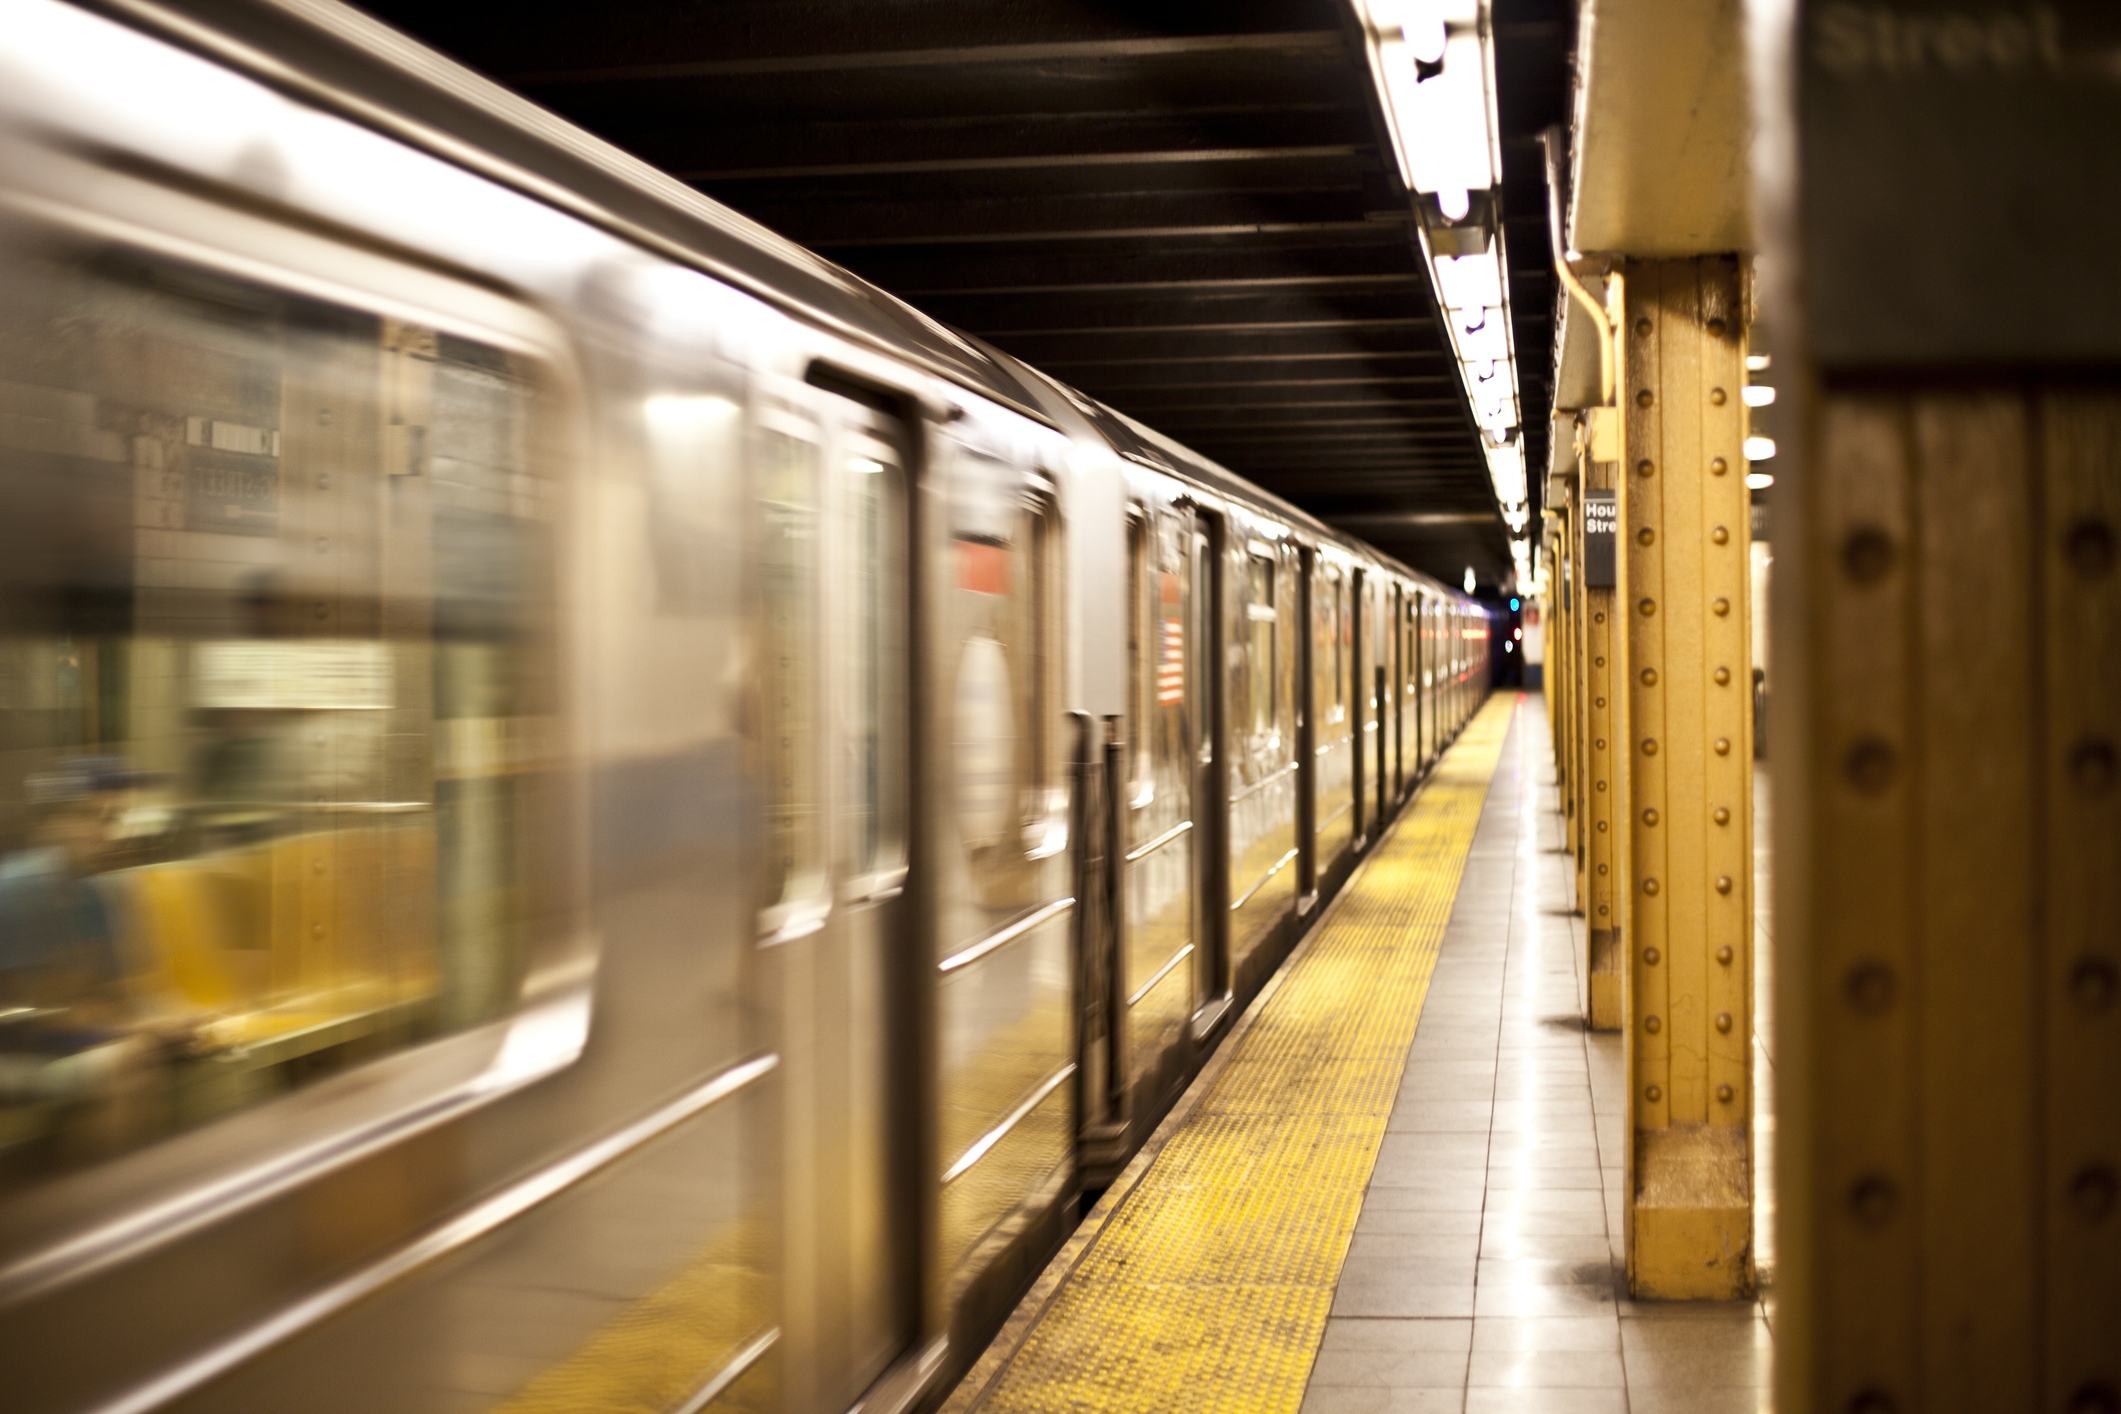 Fighting Foul Odors in the Public Transportation Arena